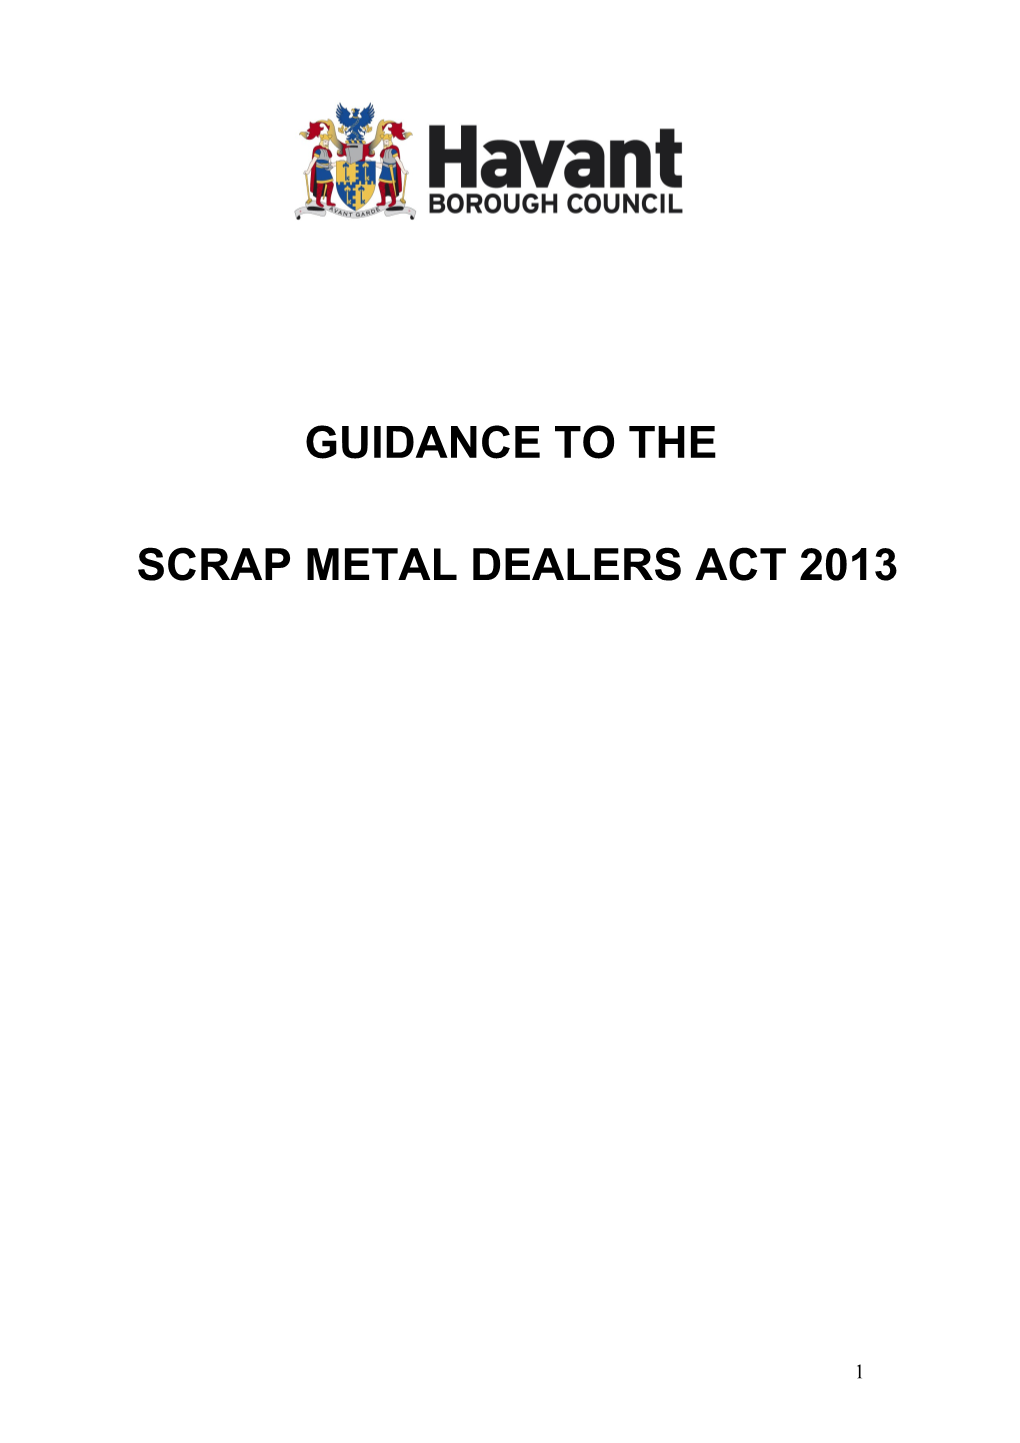 Statement of Policy and Guidelines for the Consideration of Scrap Metal Dealers Site And